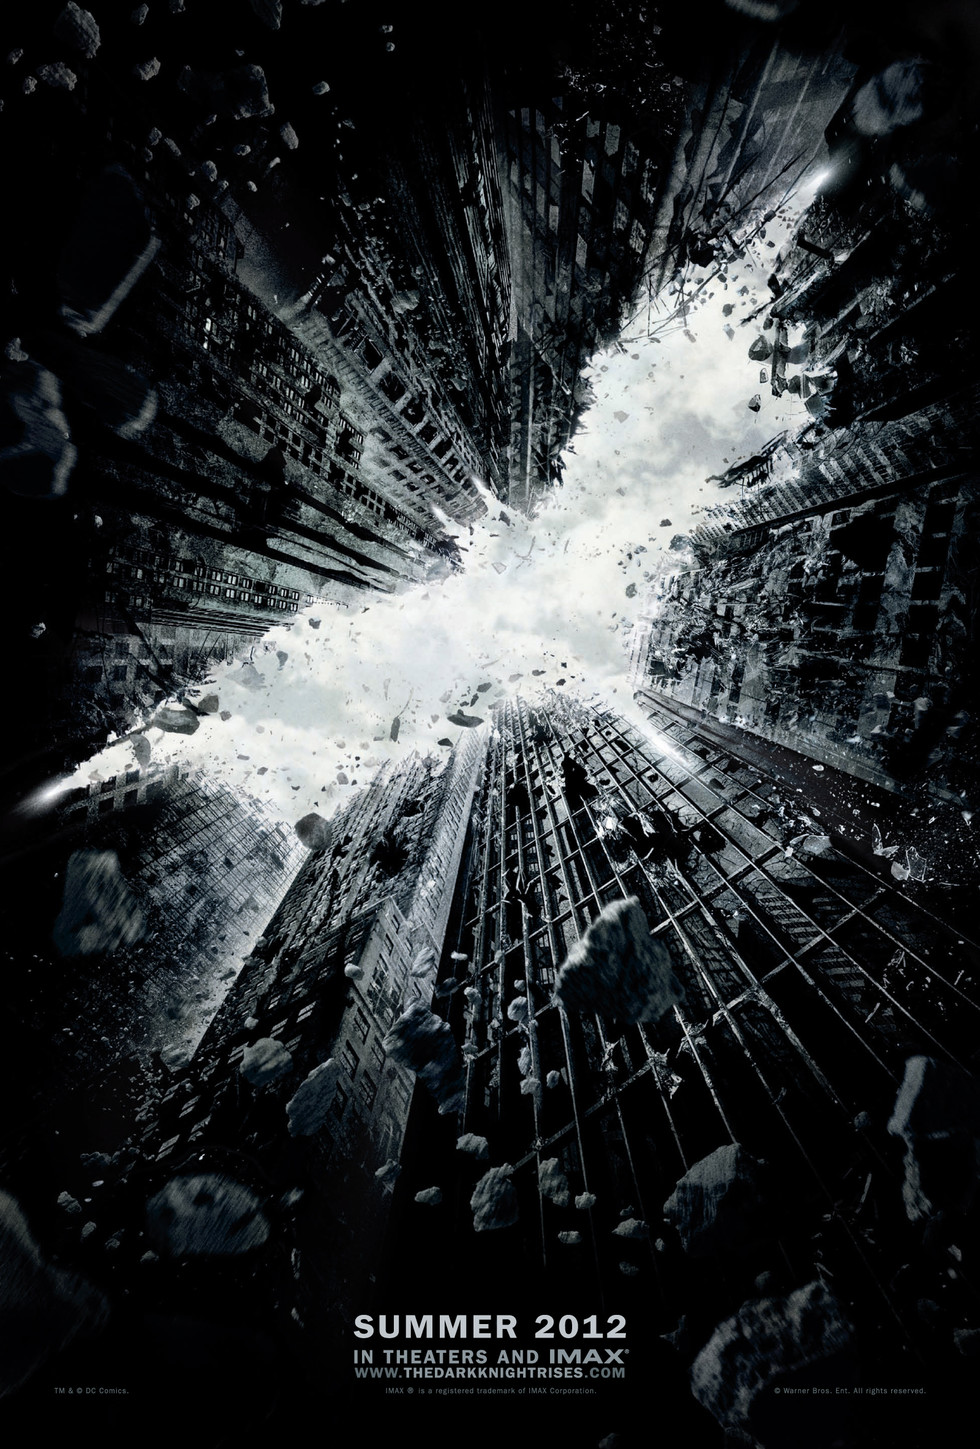 The Dark Knight Rises - Movie Poster #2 (Large)